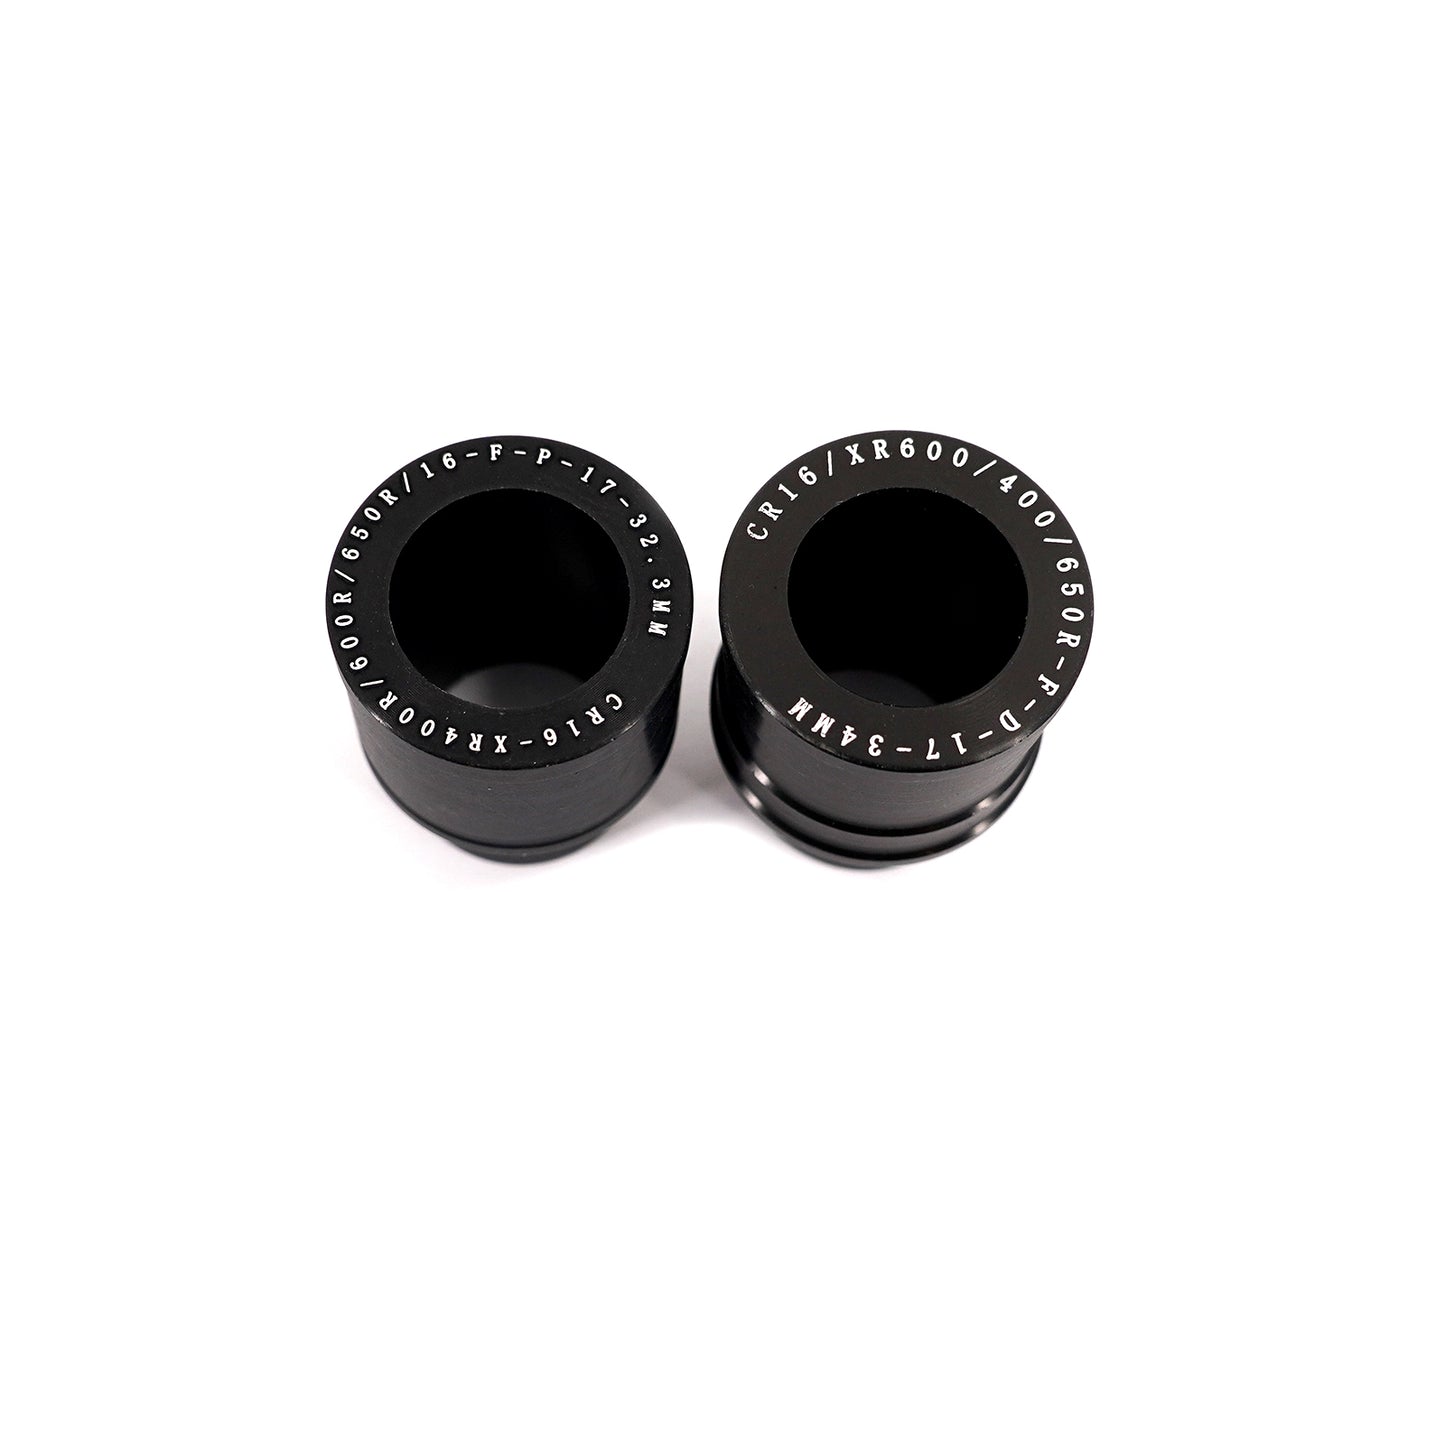 KKE Replacement Front Black Spacers For HONDA XR650R XR400R XR600R Dirtbike and Supermoto Wheels